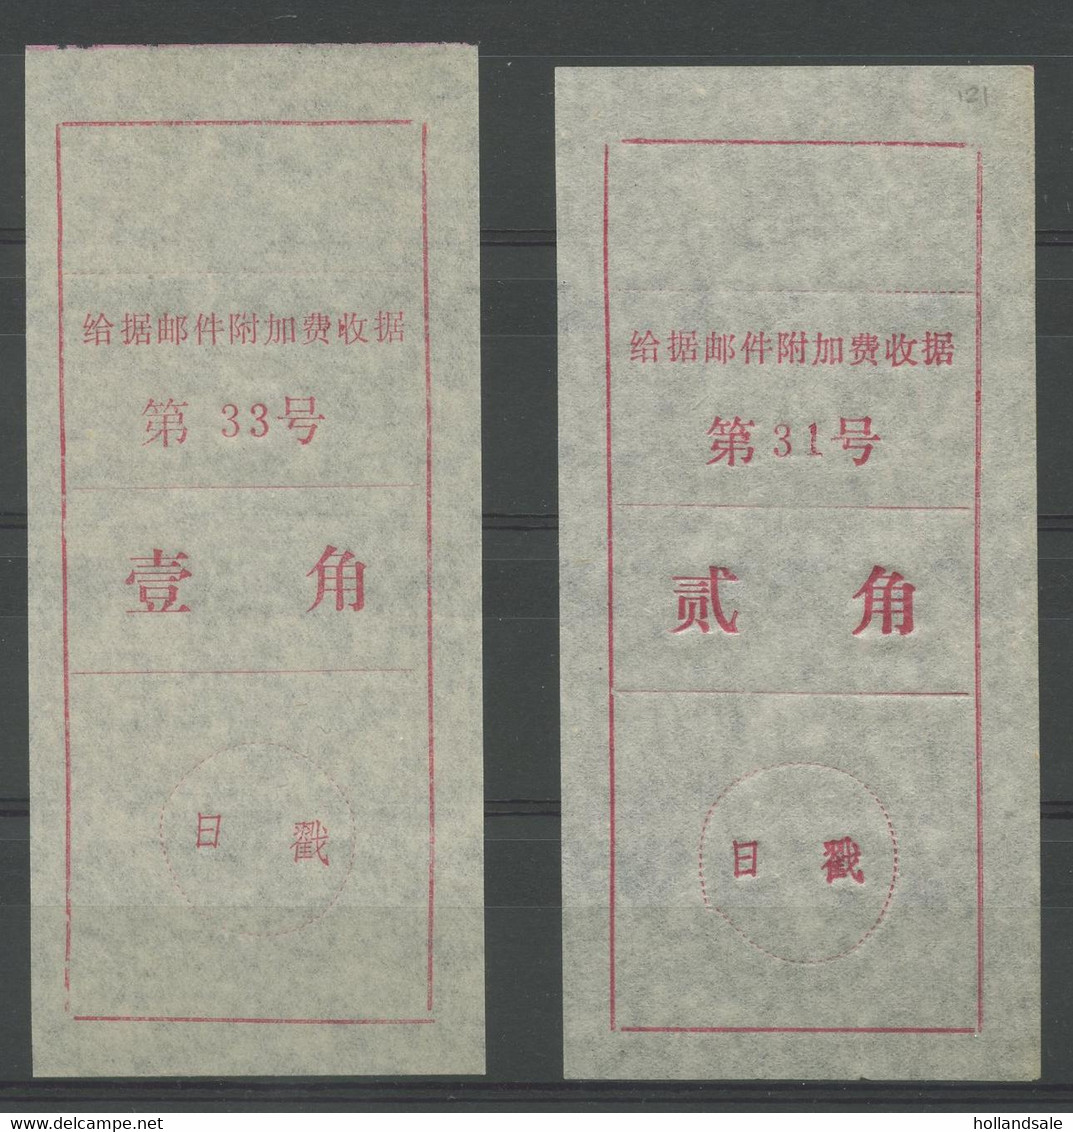 CHINA PRC  -  Added Charge - Hubei Prov. D&O # 12-0083, 12-0083A - Postage Due